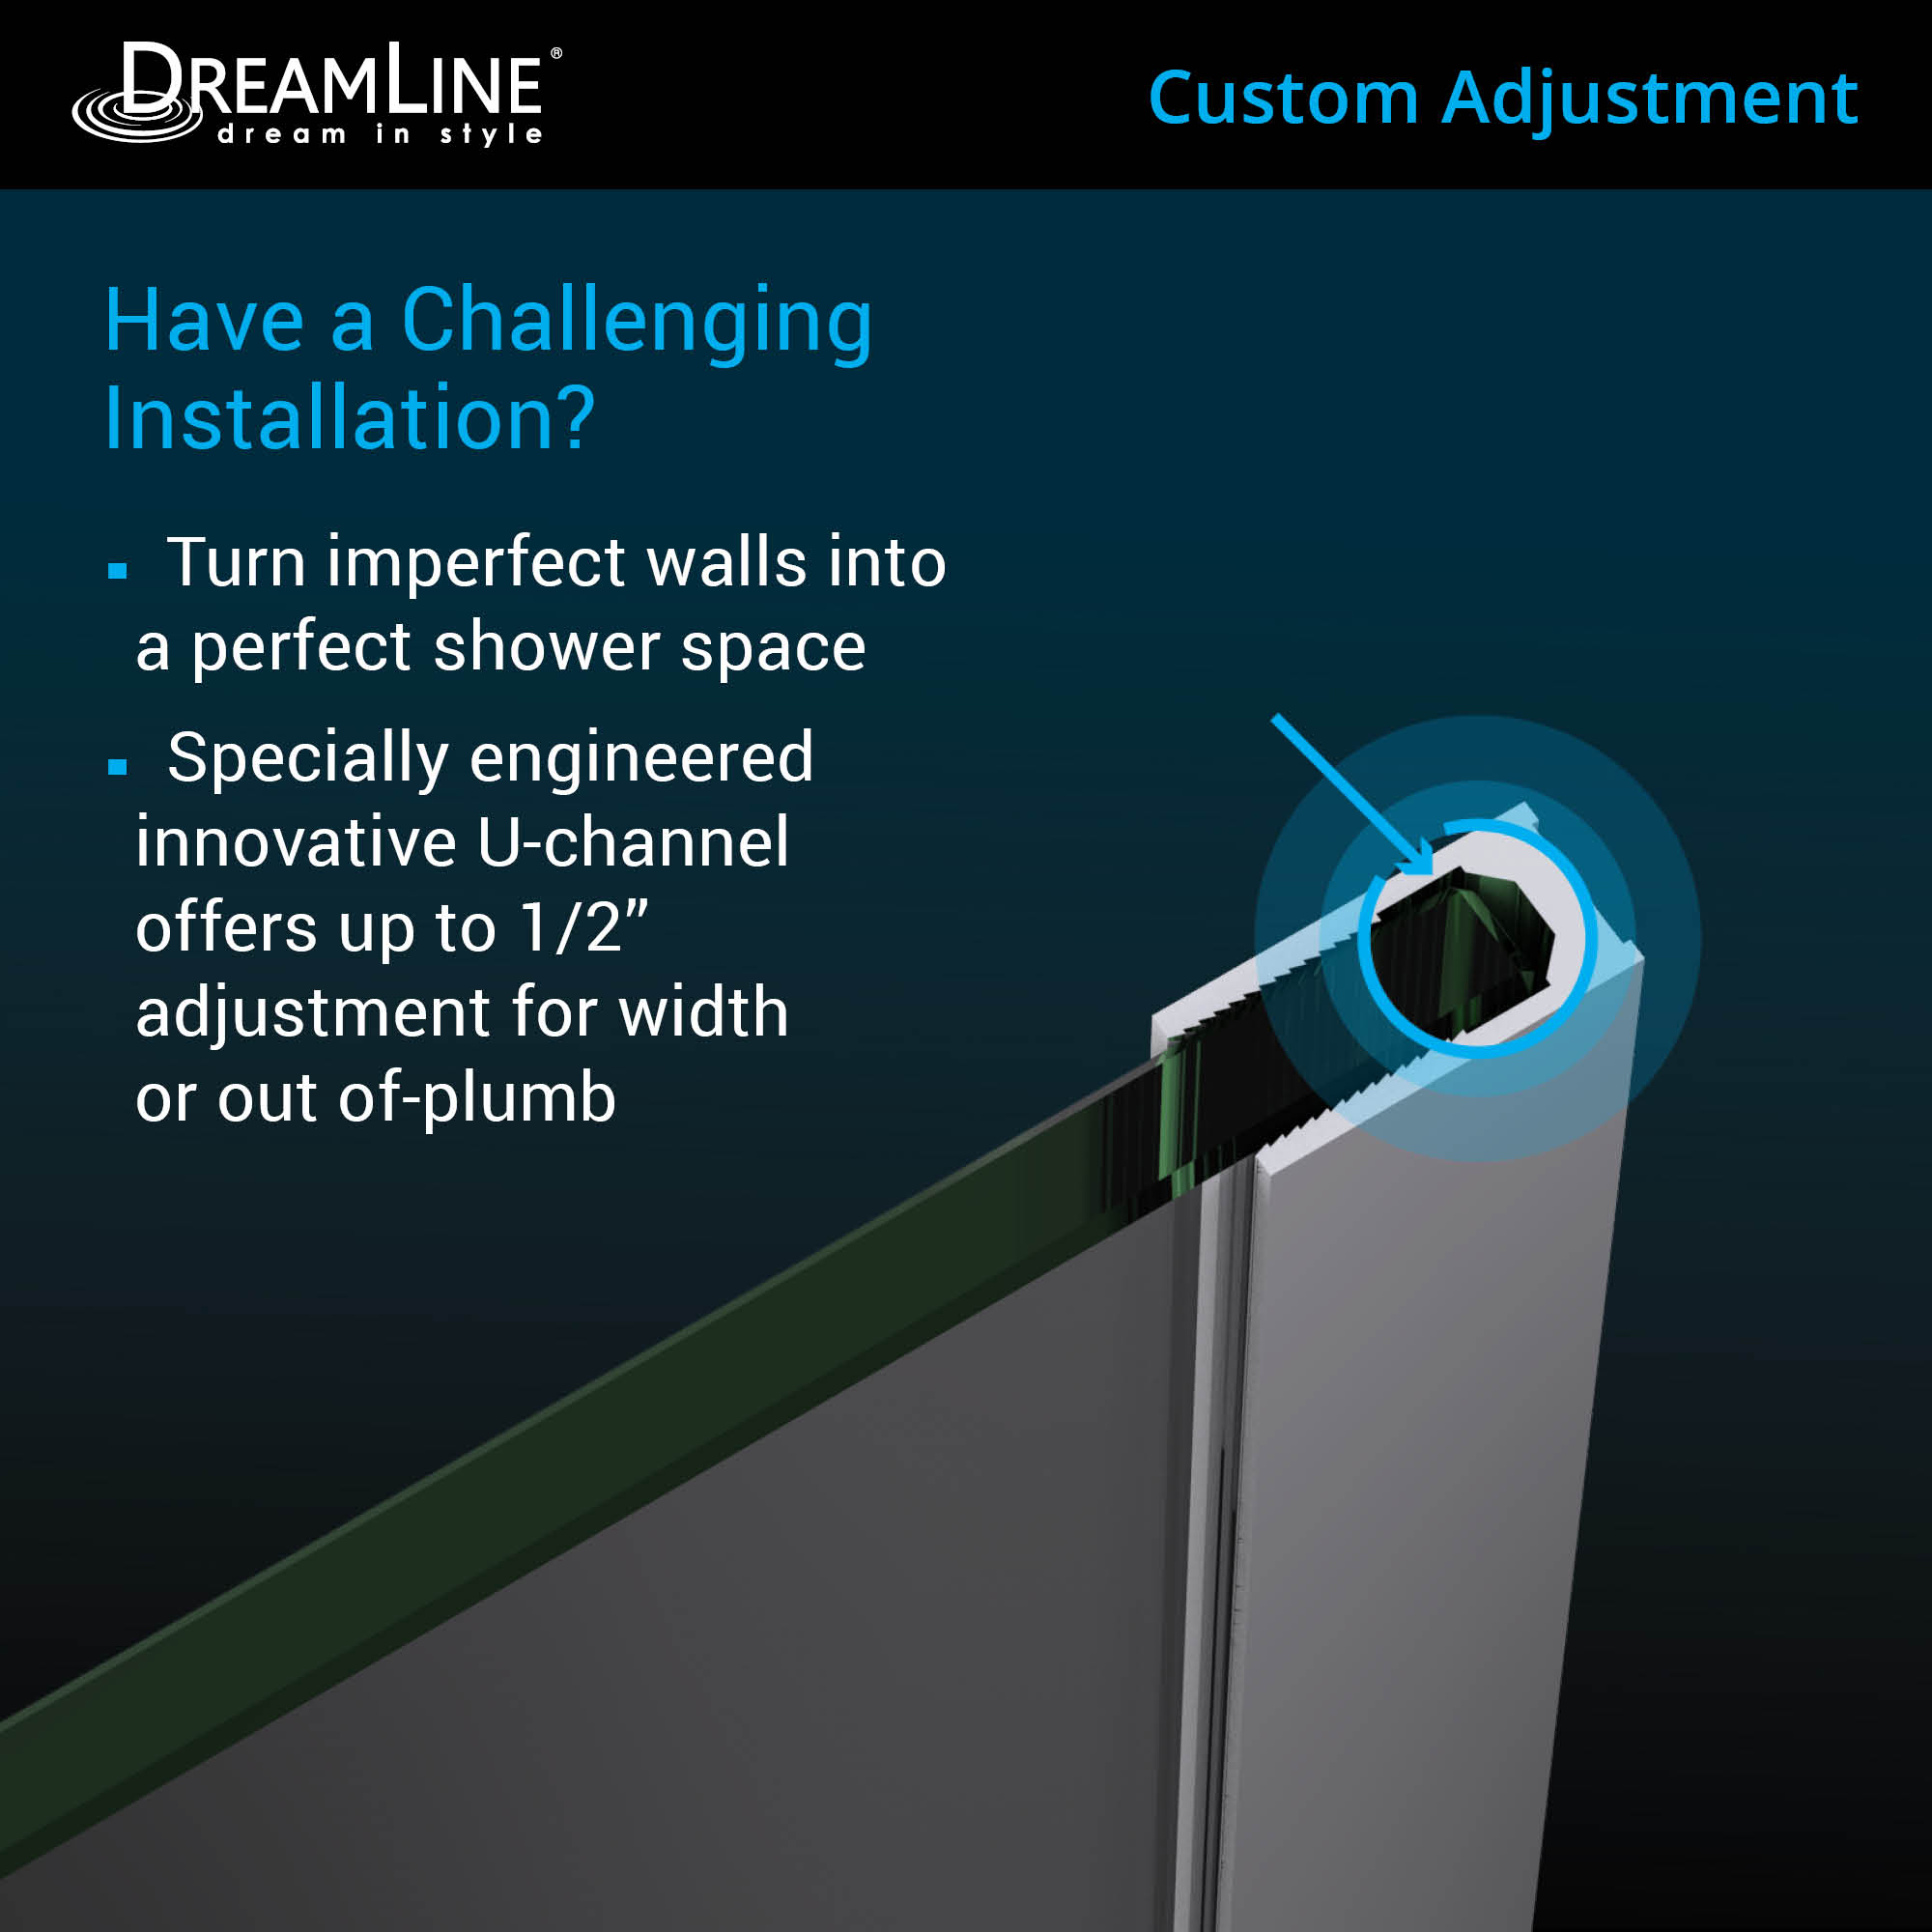 DreamLine Unidoor Plus 30 3/8 in. W x 30 in. D x 72 in. H Frameless Hinged Shower Enclosure, Clear Glass, Brushed Nickel